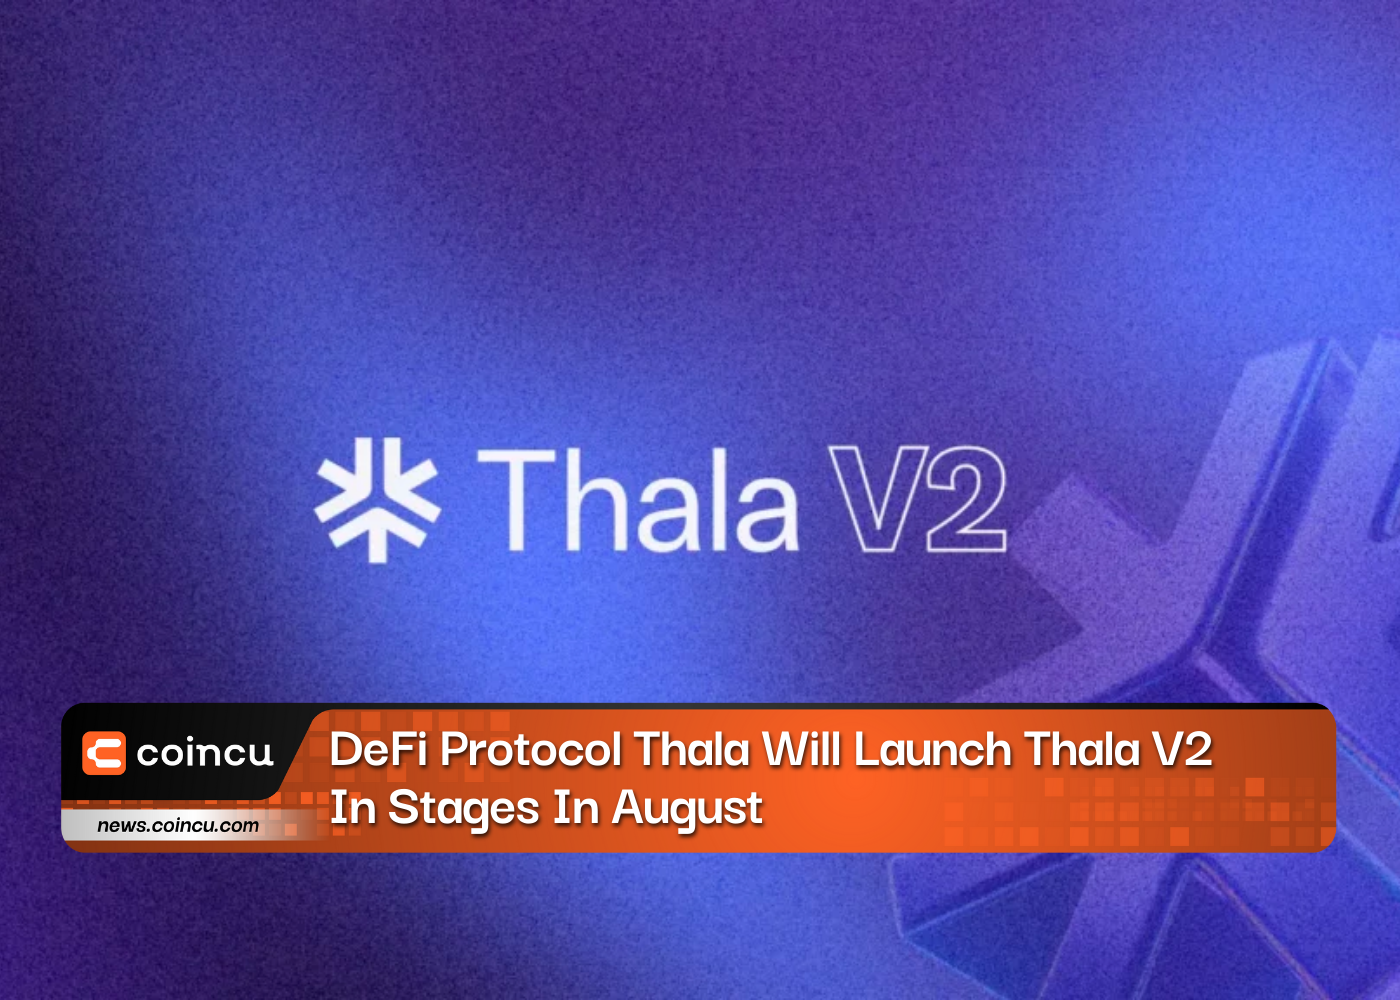 DeFi Protocol Thala Will Launch Thala V2 In Stages In August